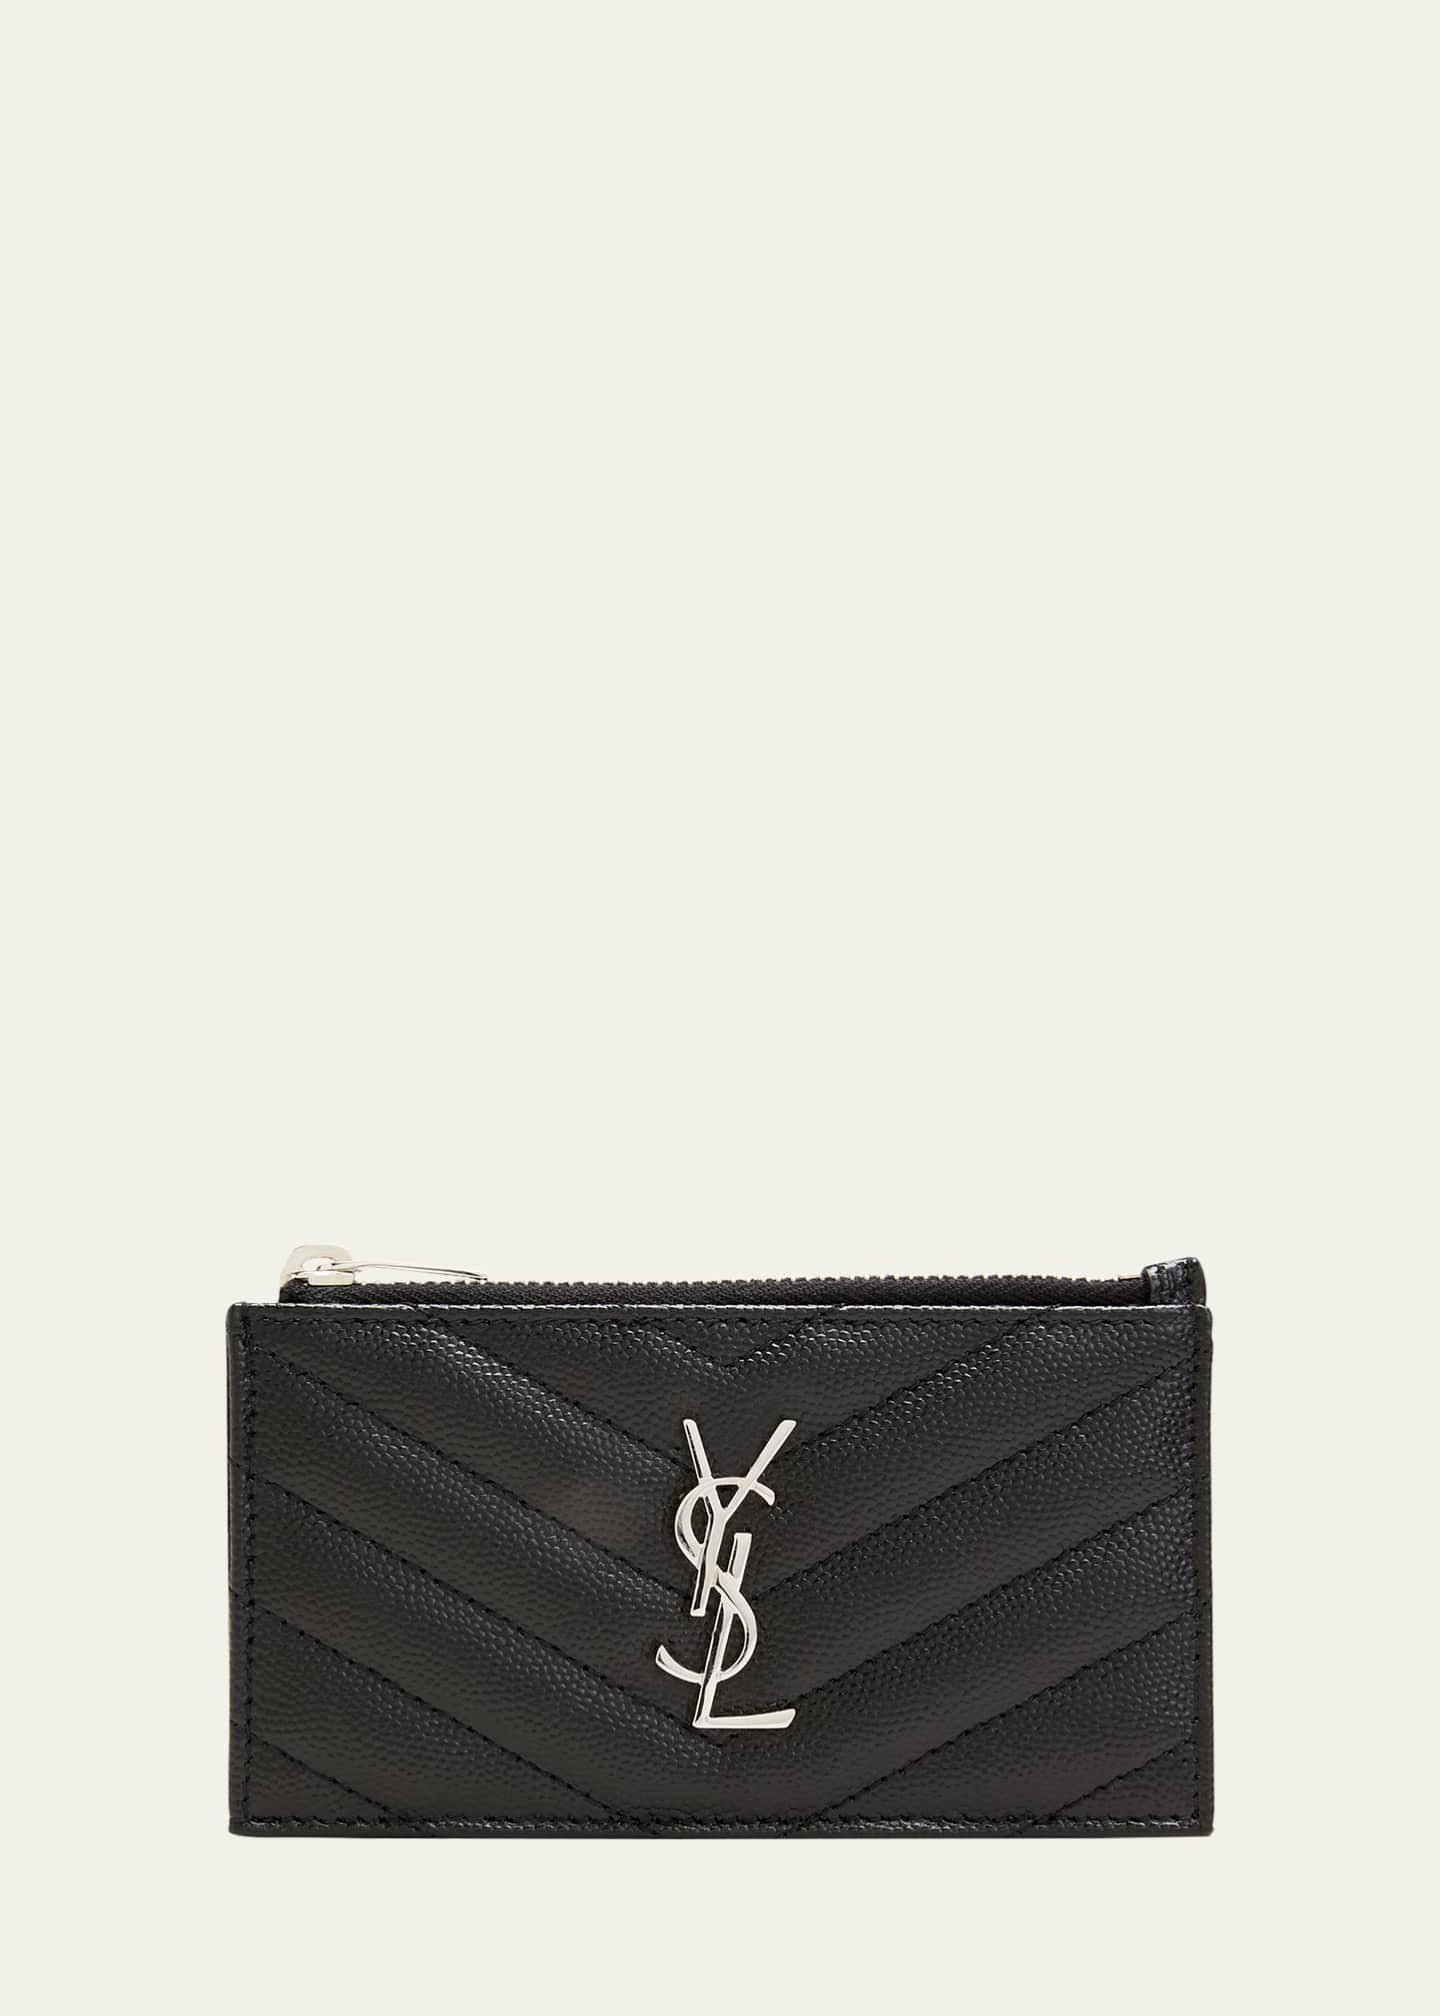 Saint Laurent Fragments YSL Quilted Leather Card Case - Bergdorf Goodman